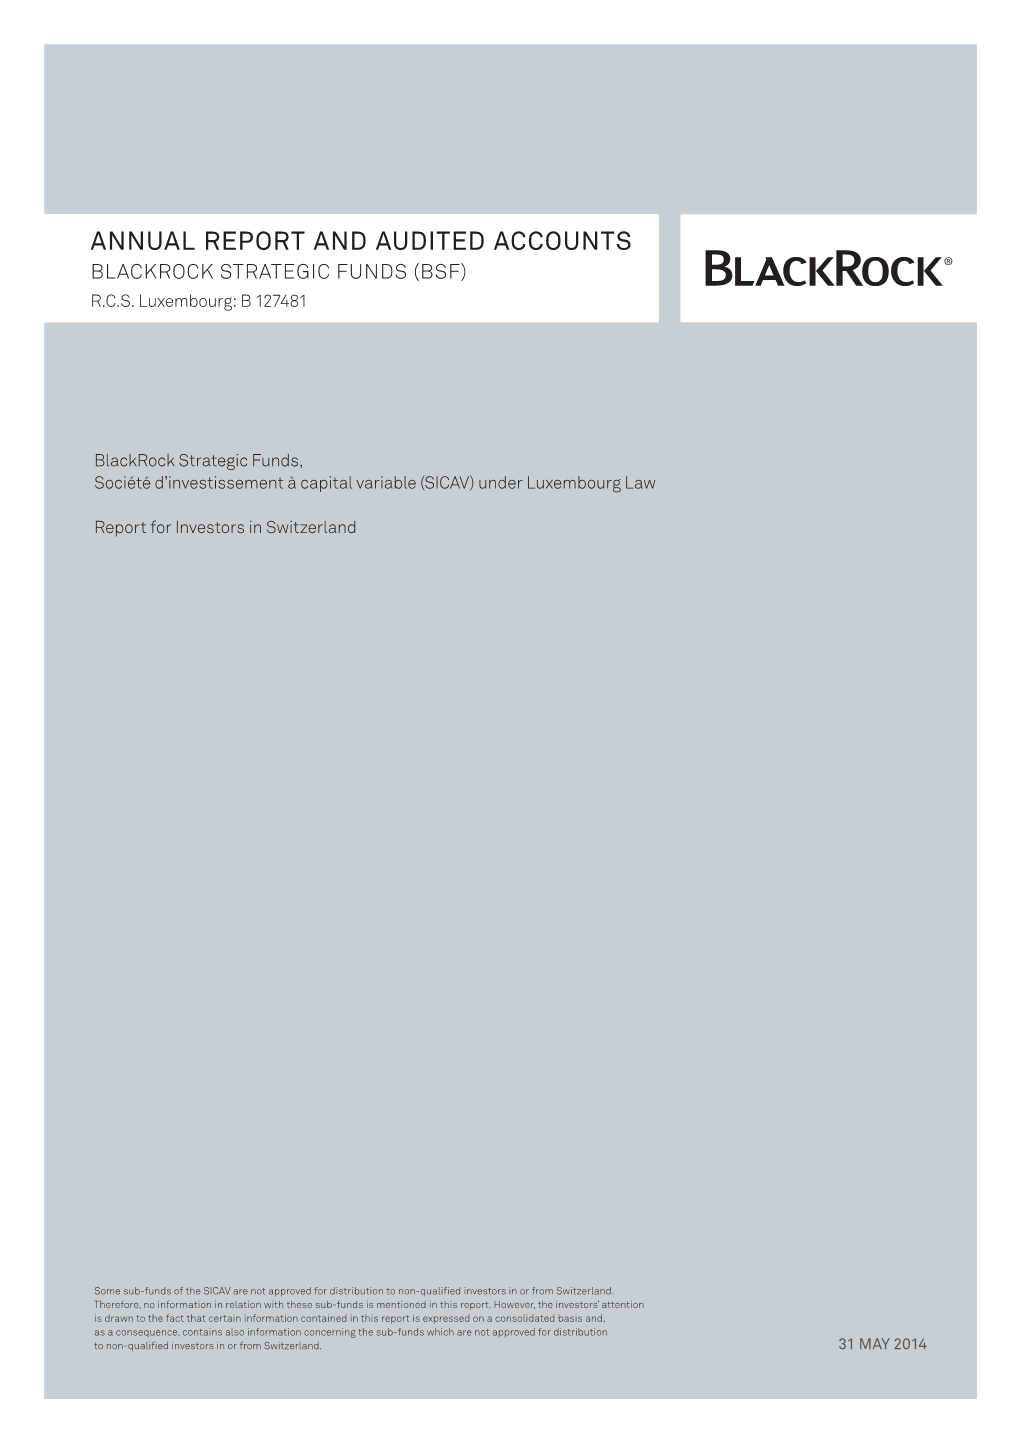 Annual Report and Audited Accounts Title (40–50 Characters) Blackrock Strategic Funds (Bsf) Subtitle (40-50 Characters) R.C.S